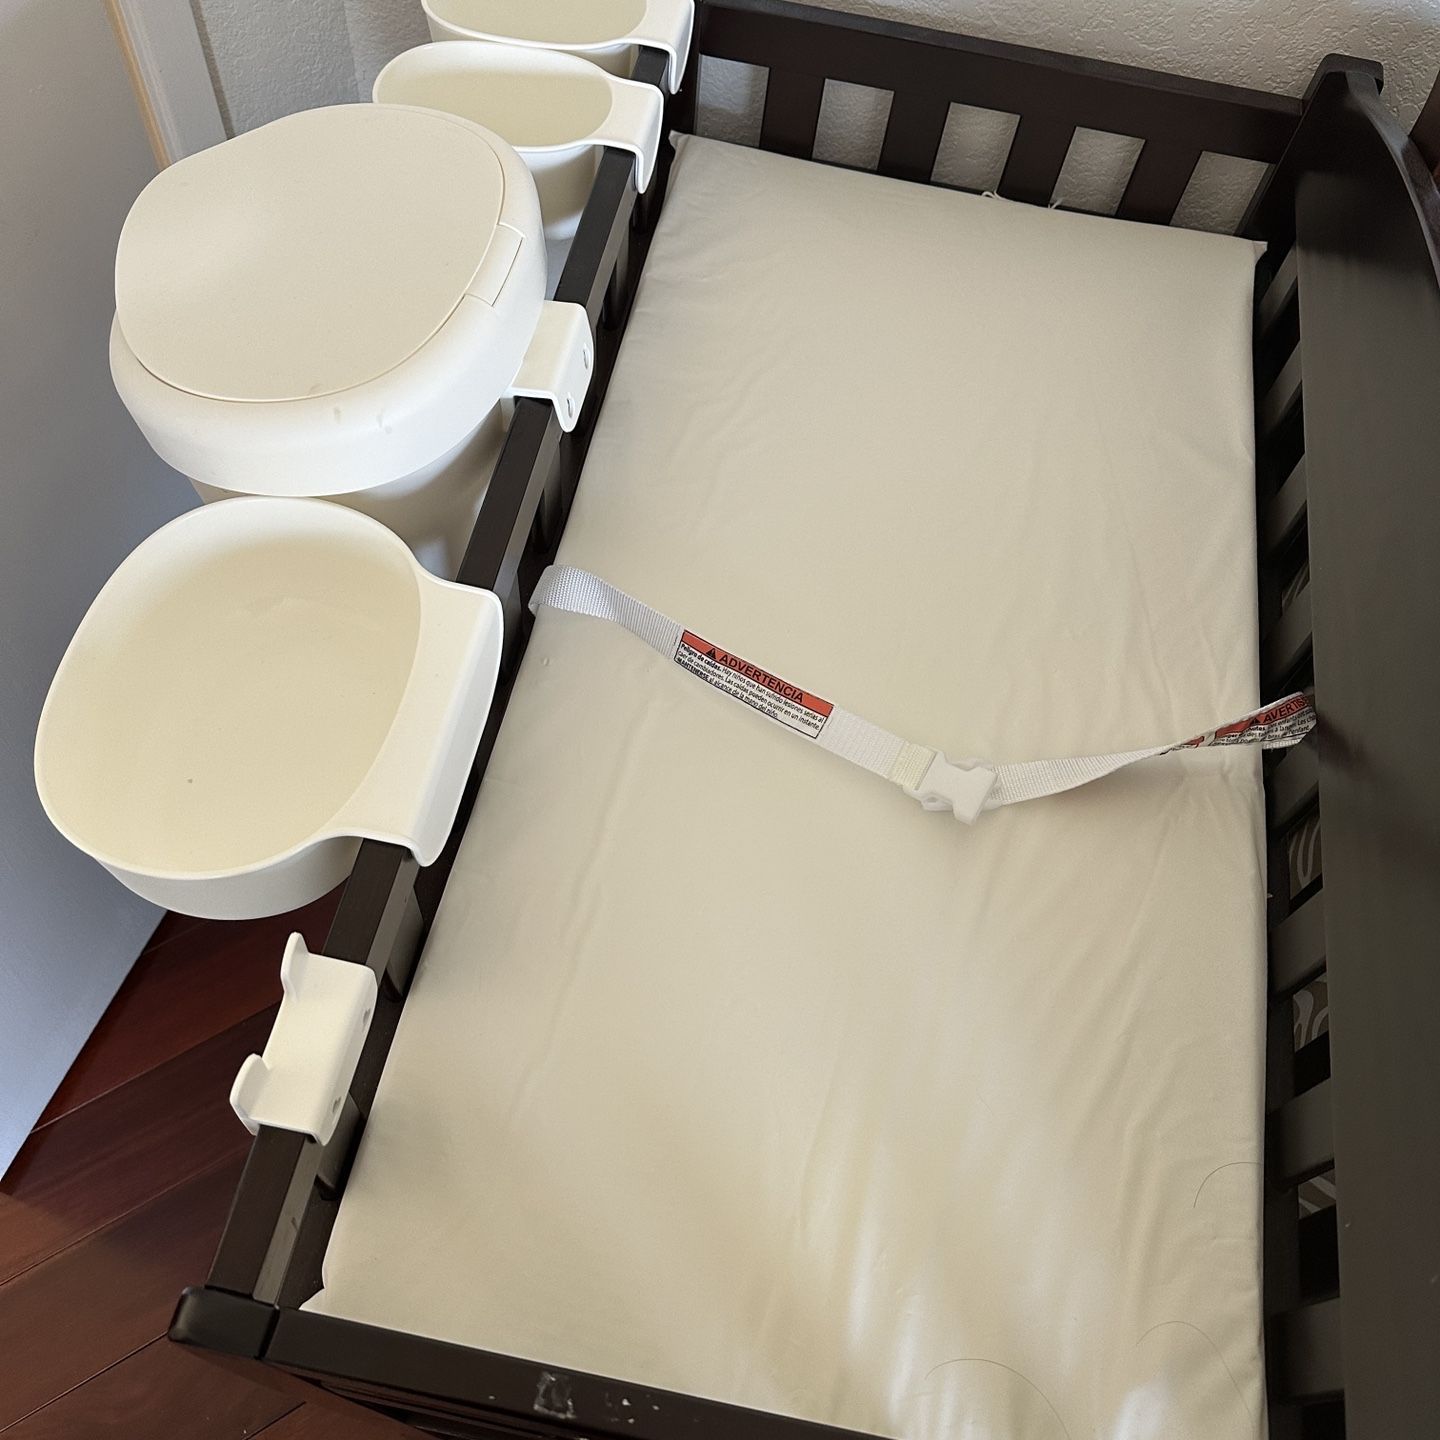 Infant Changing Table with Pad (diaper changing Tabel)